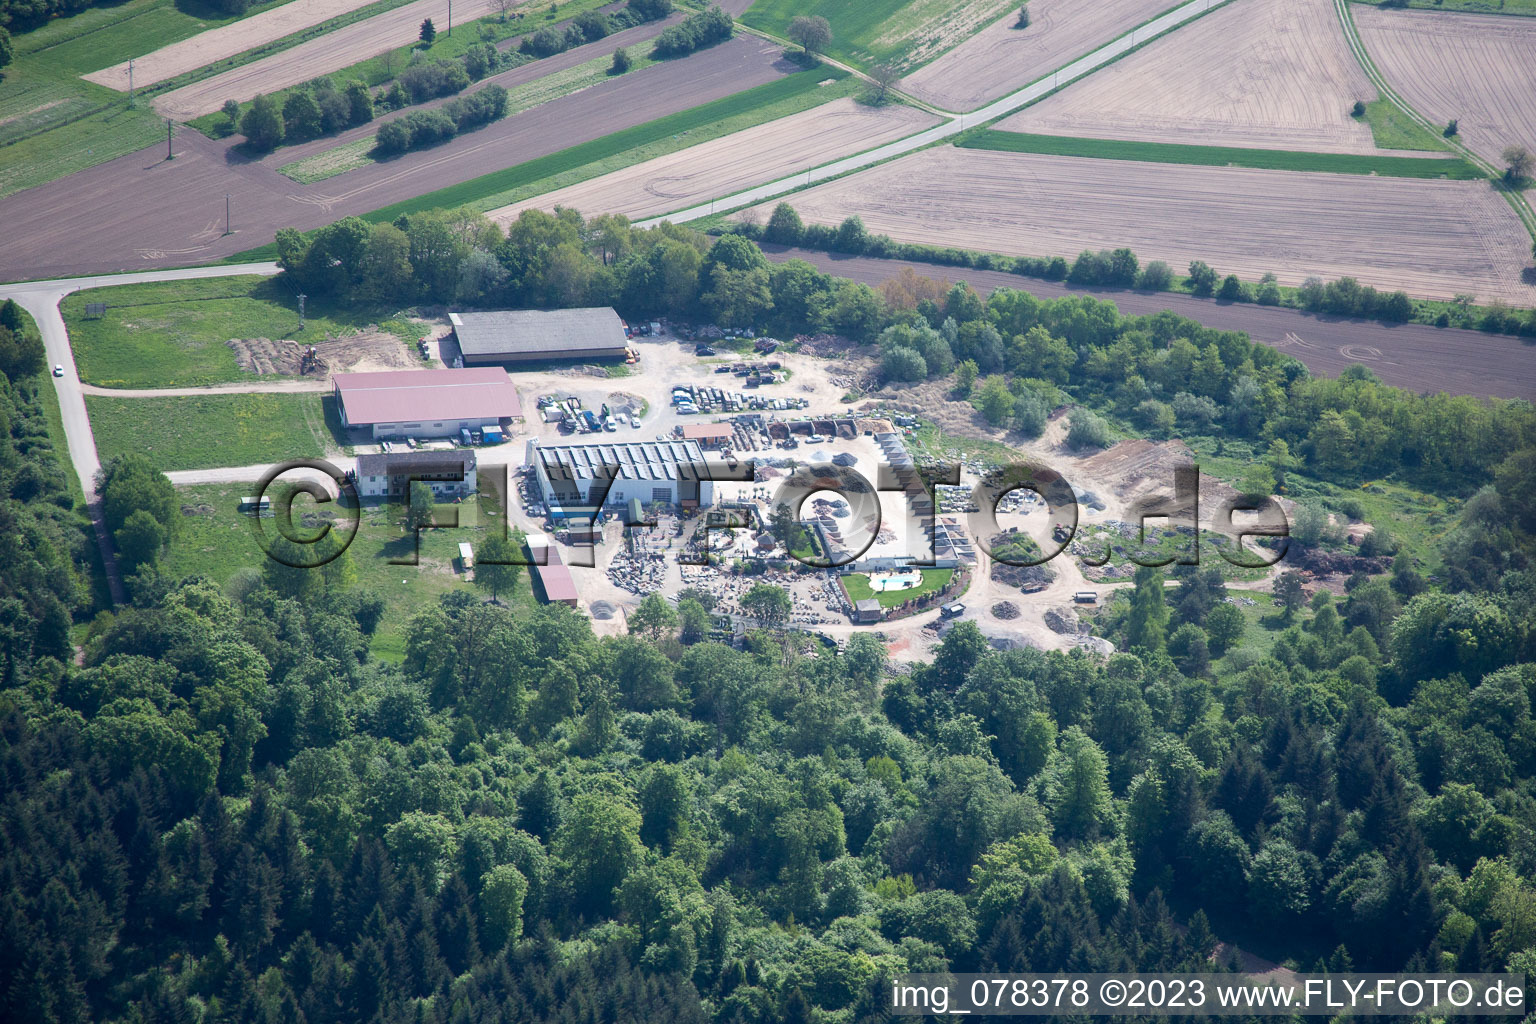 Oblique view of Palatinum landscape and garden design in Hagenbach in the state Rhineland-Palatinate, Germany